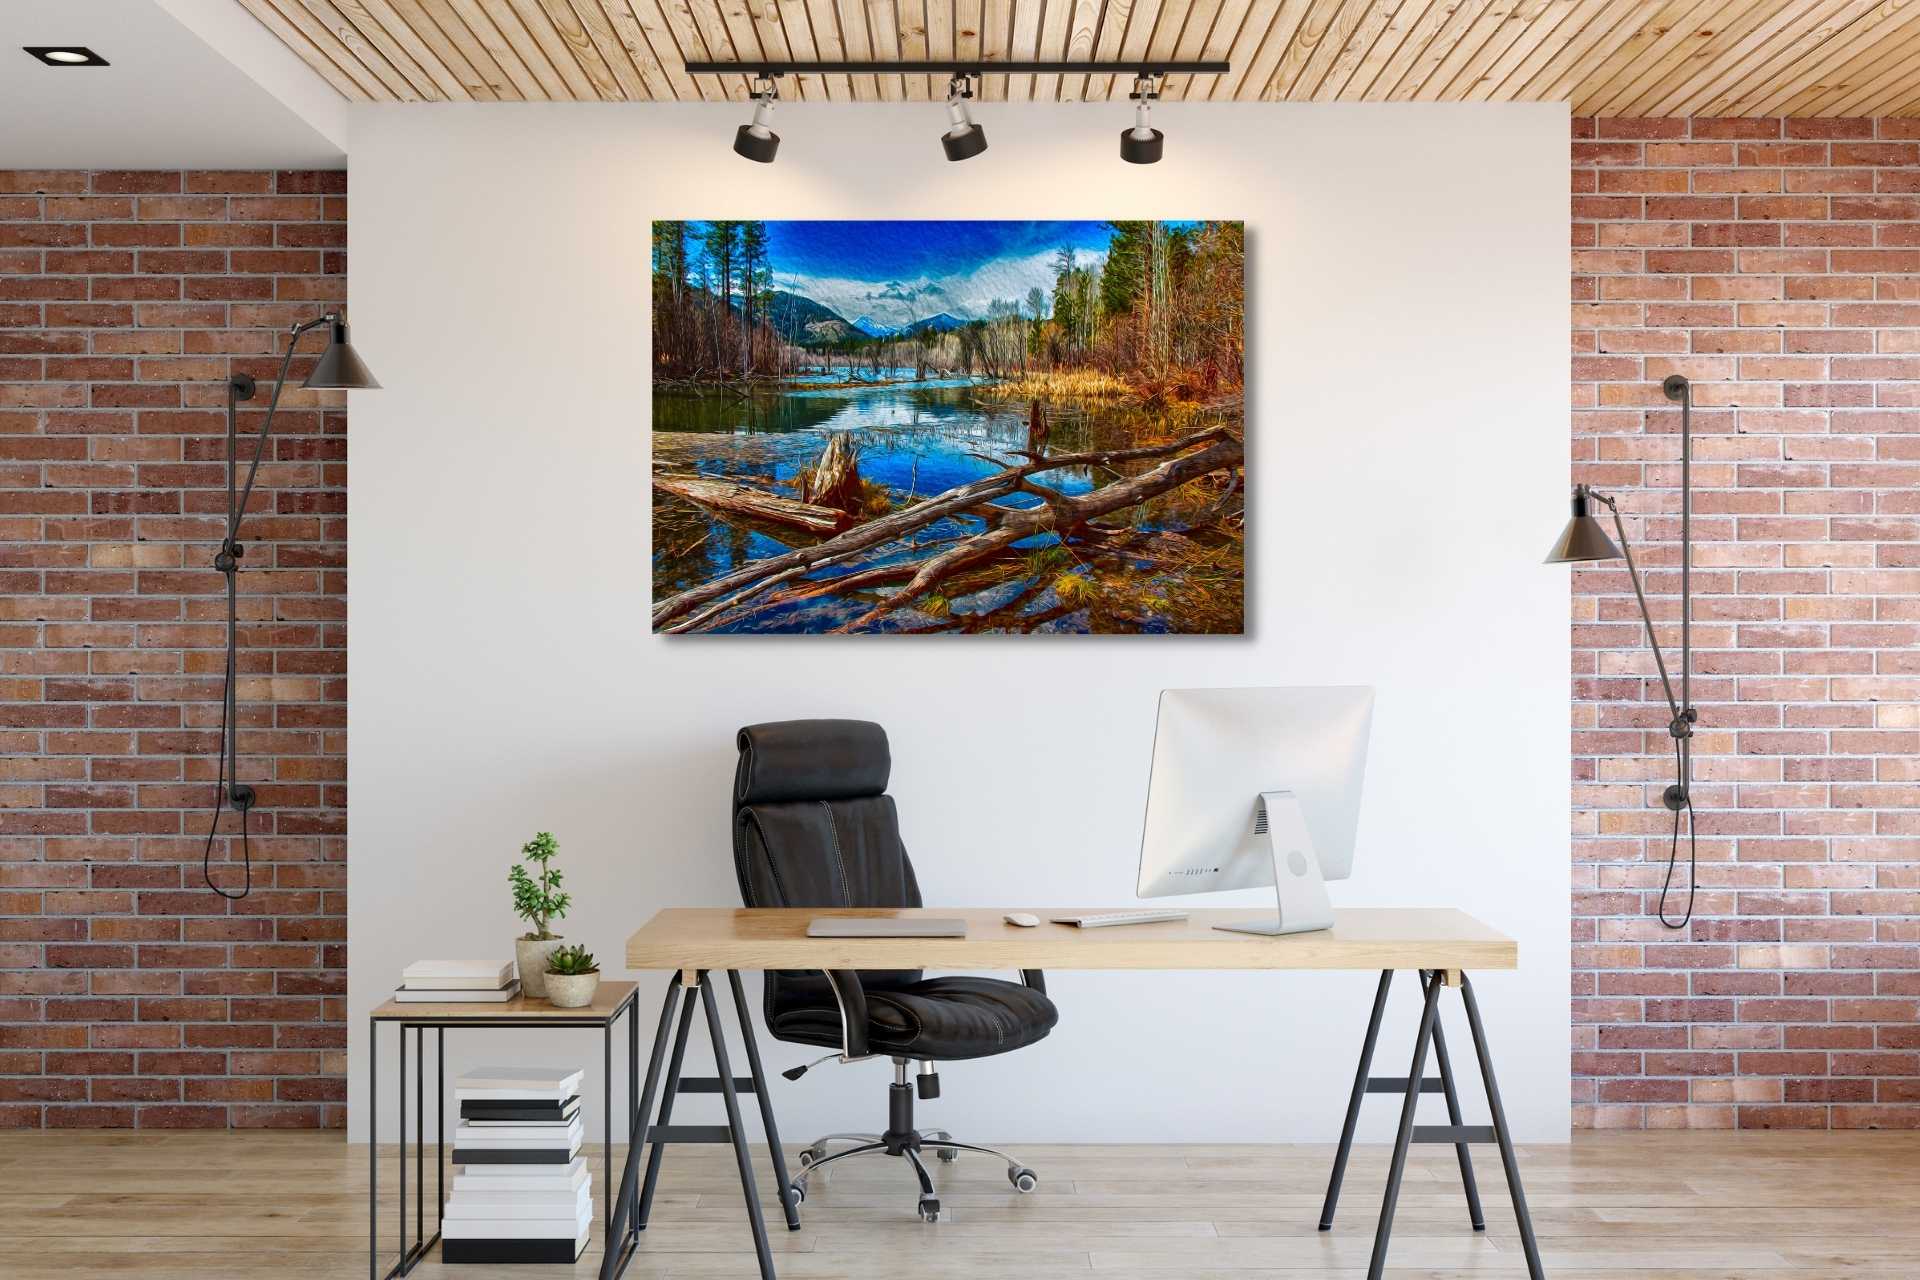 Landscape art in an contemporary industrial interior design style